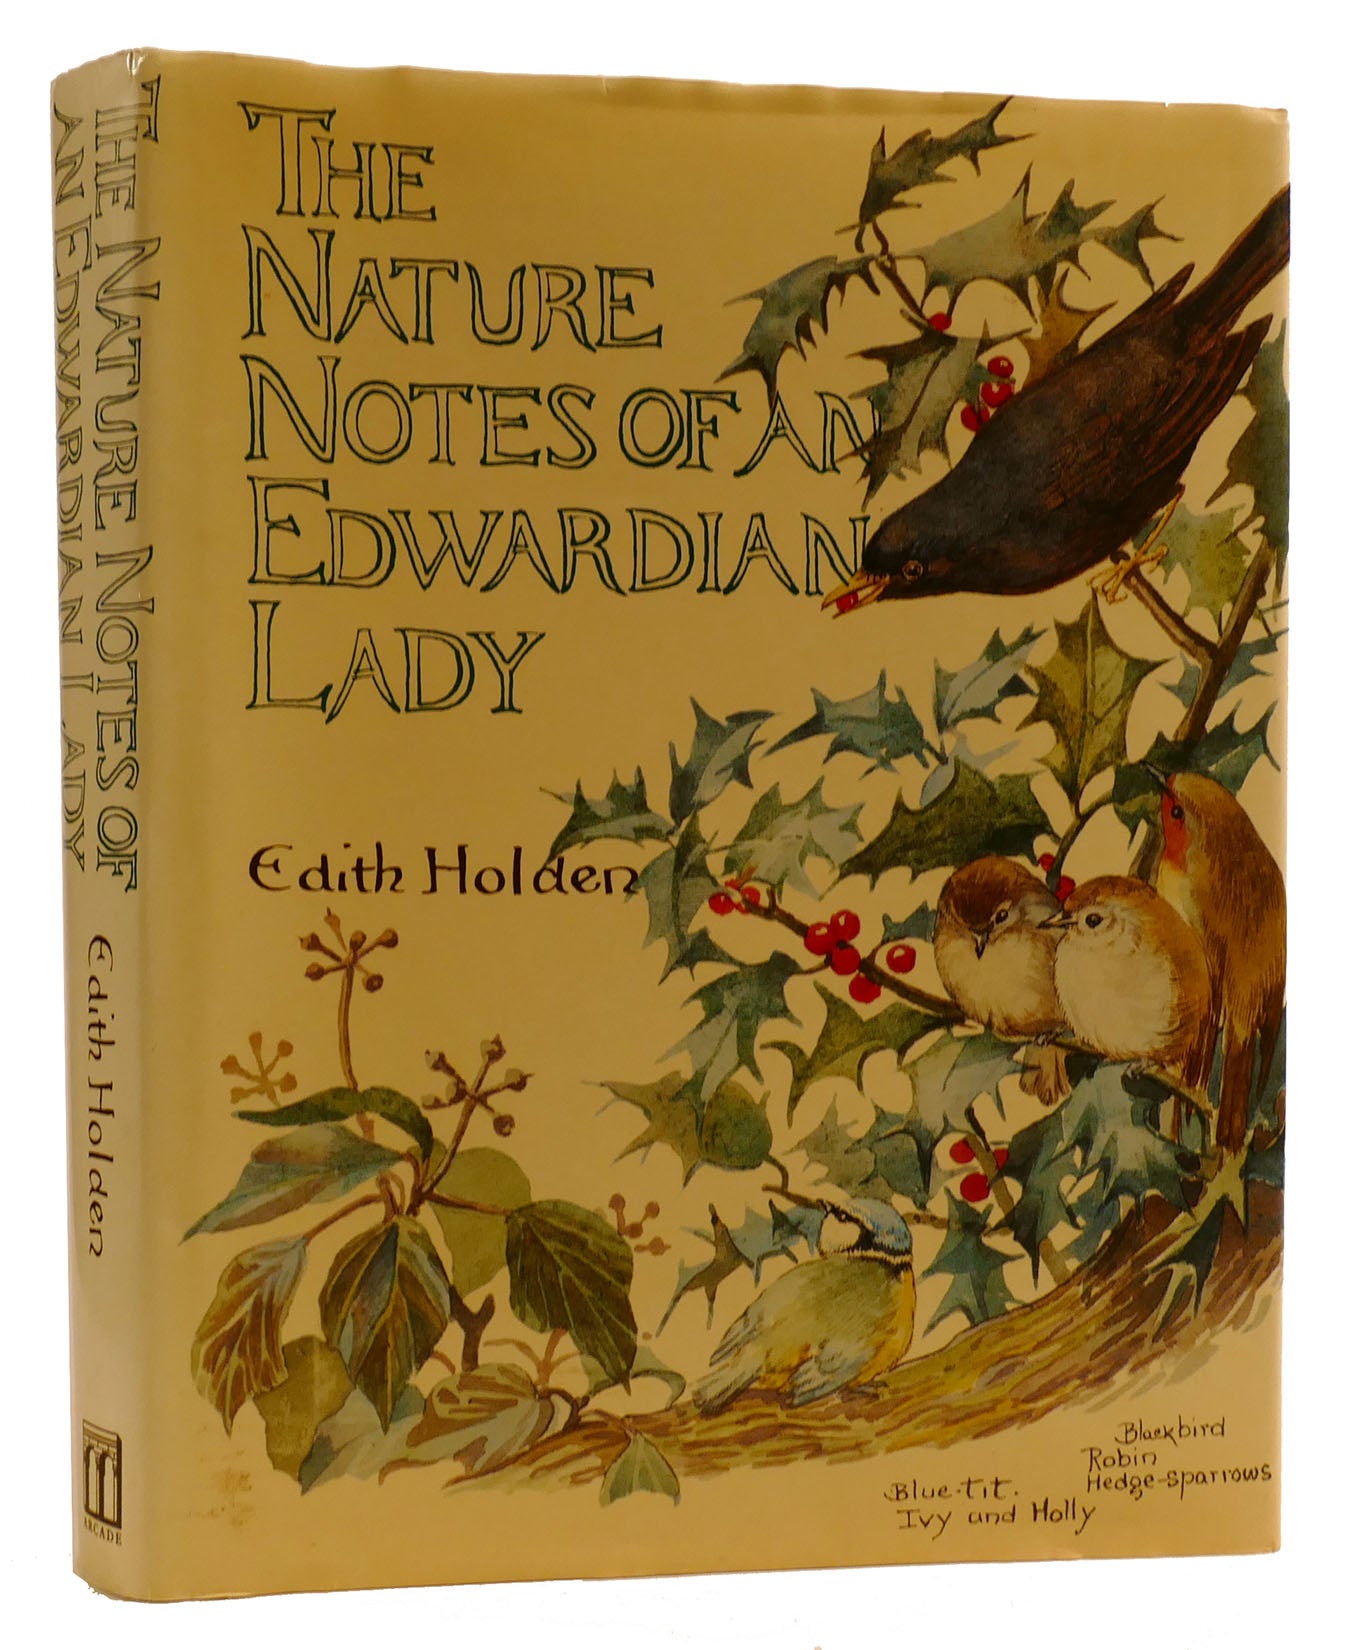 THE NATURE NOTES OF AN EDWARDIAN LADY | Edith Holden | 1st U.S. 